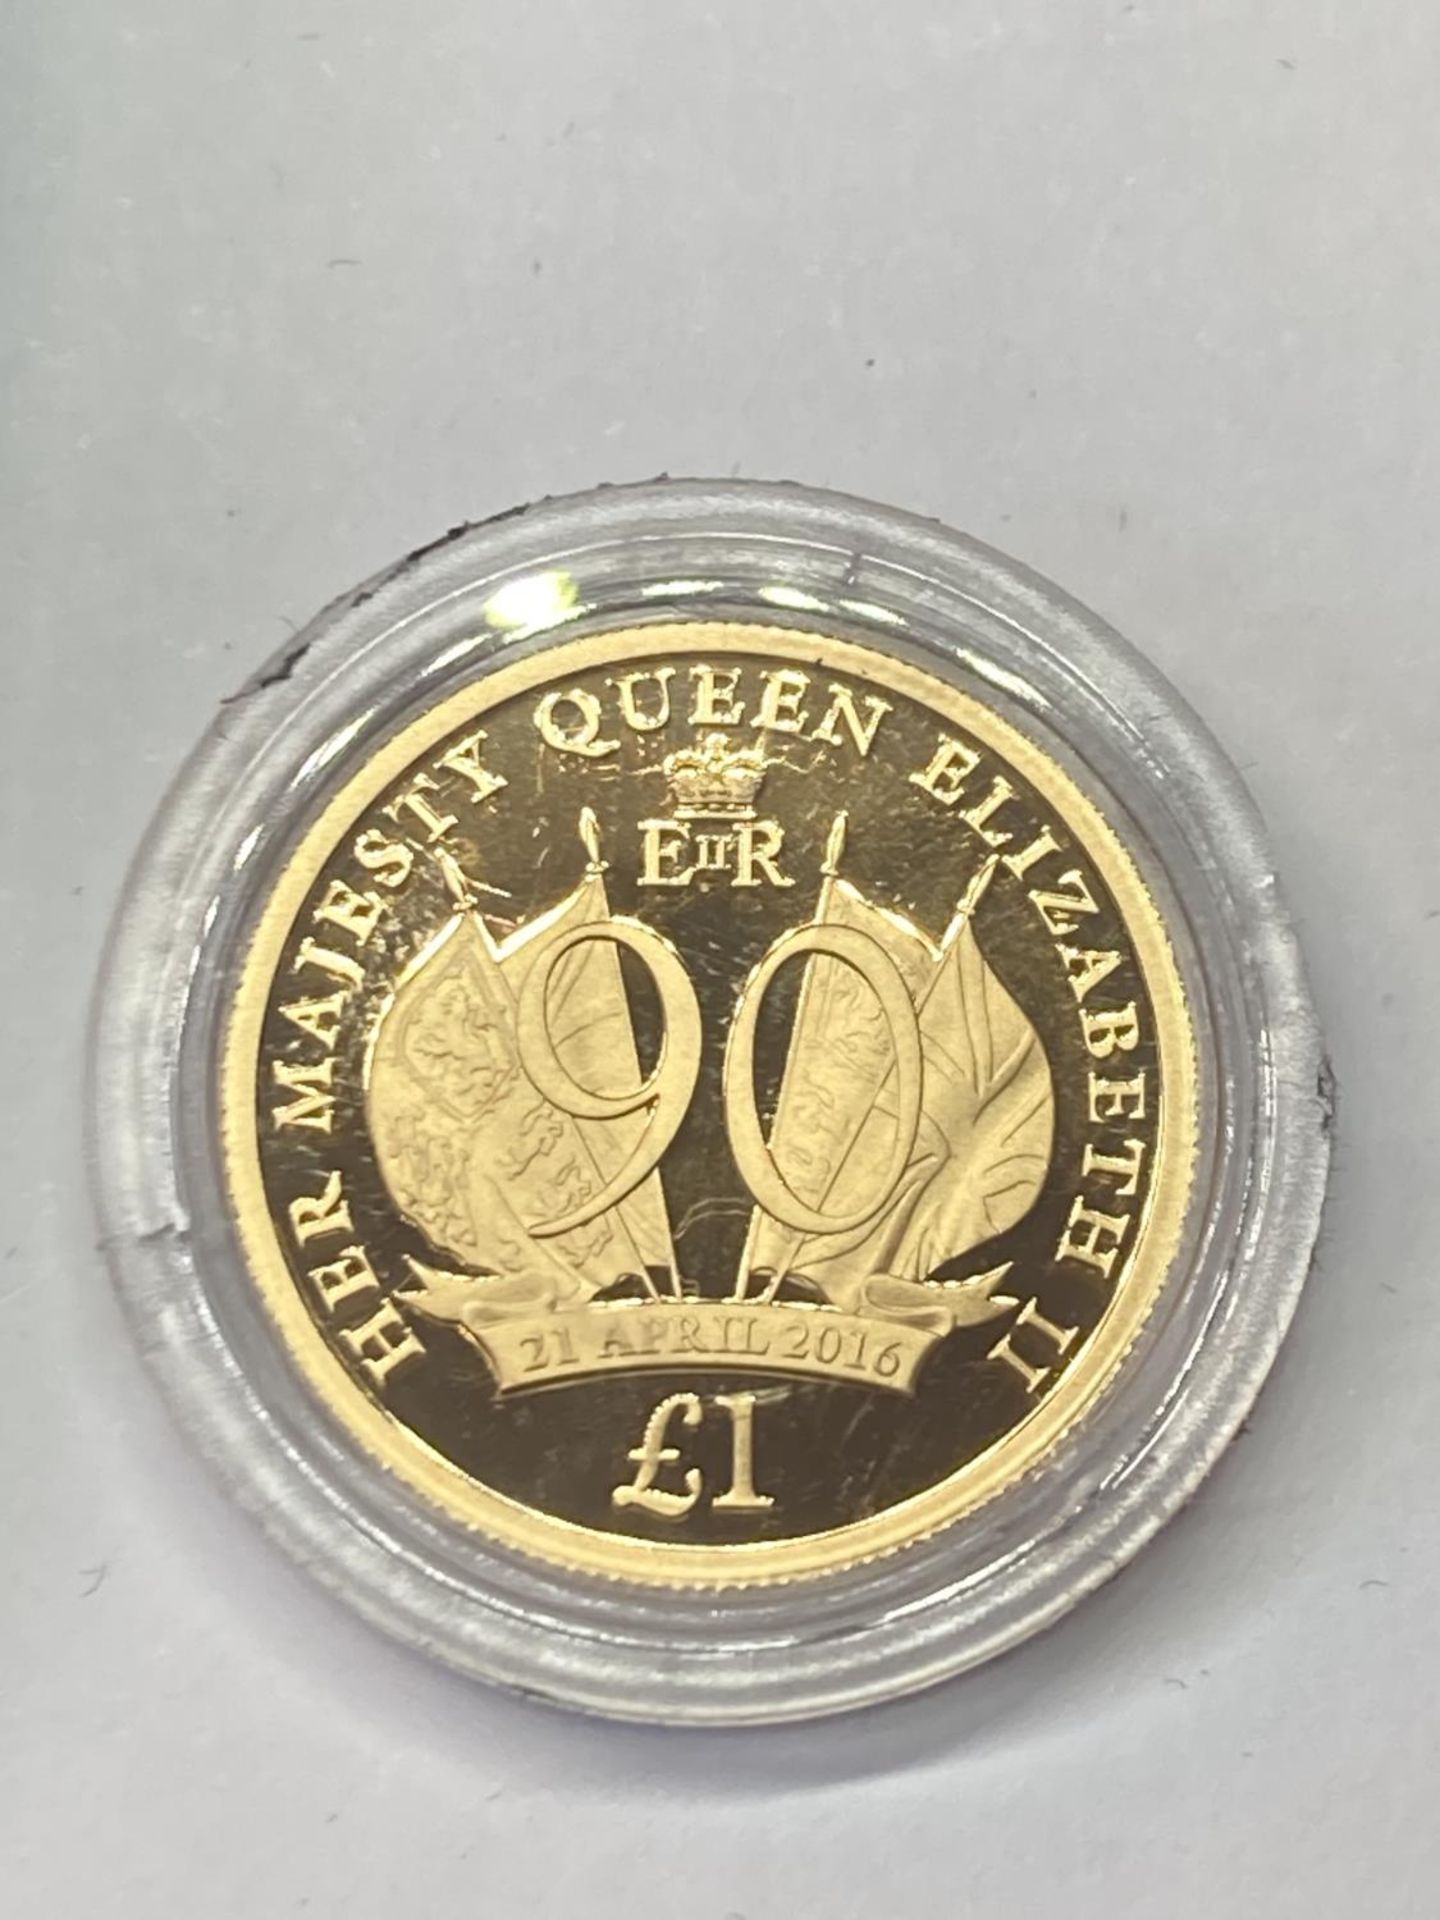 A 2016 QE2 90TH BIRTHDAY JERSEY £1 GOLD PROOF COIN LIMITED EDITION NUMBER 773 OF 995 GROSS WEIGHT - Bild 2 aus 4